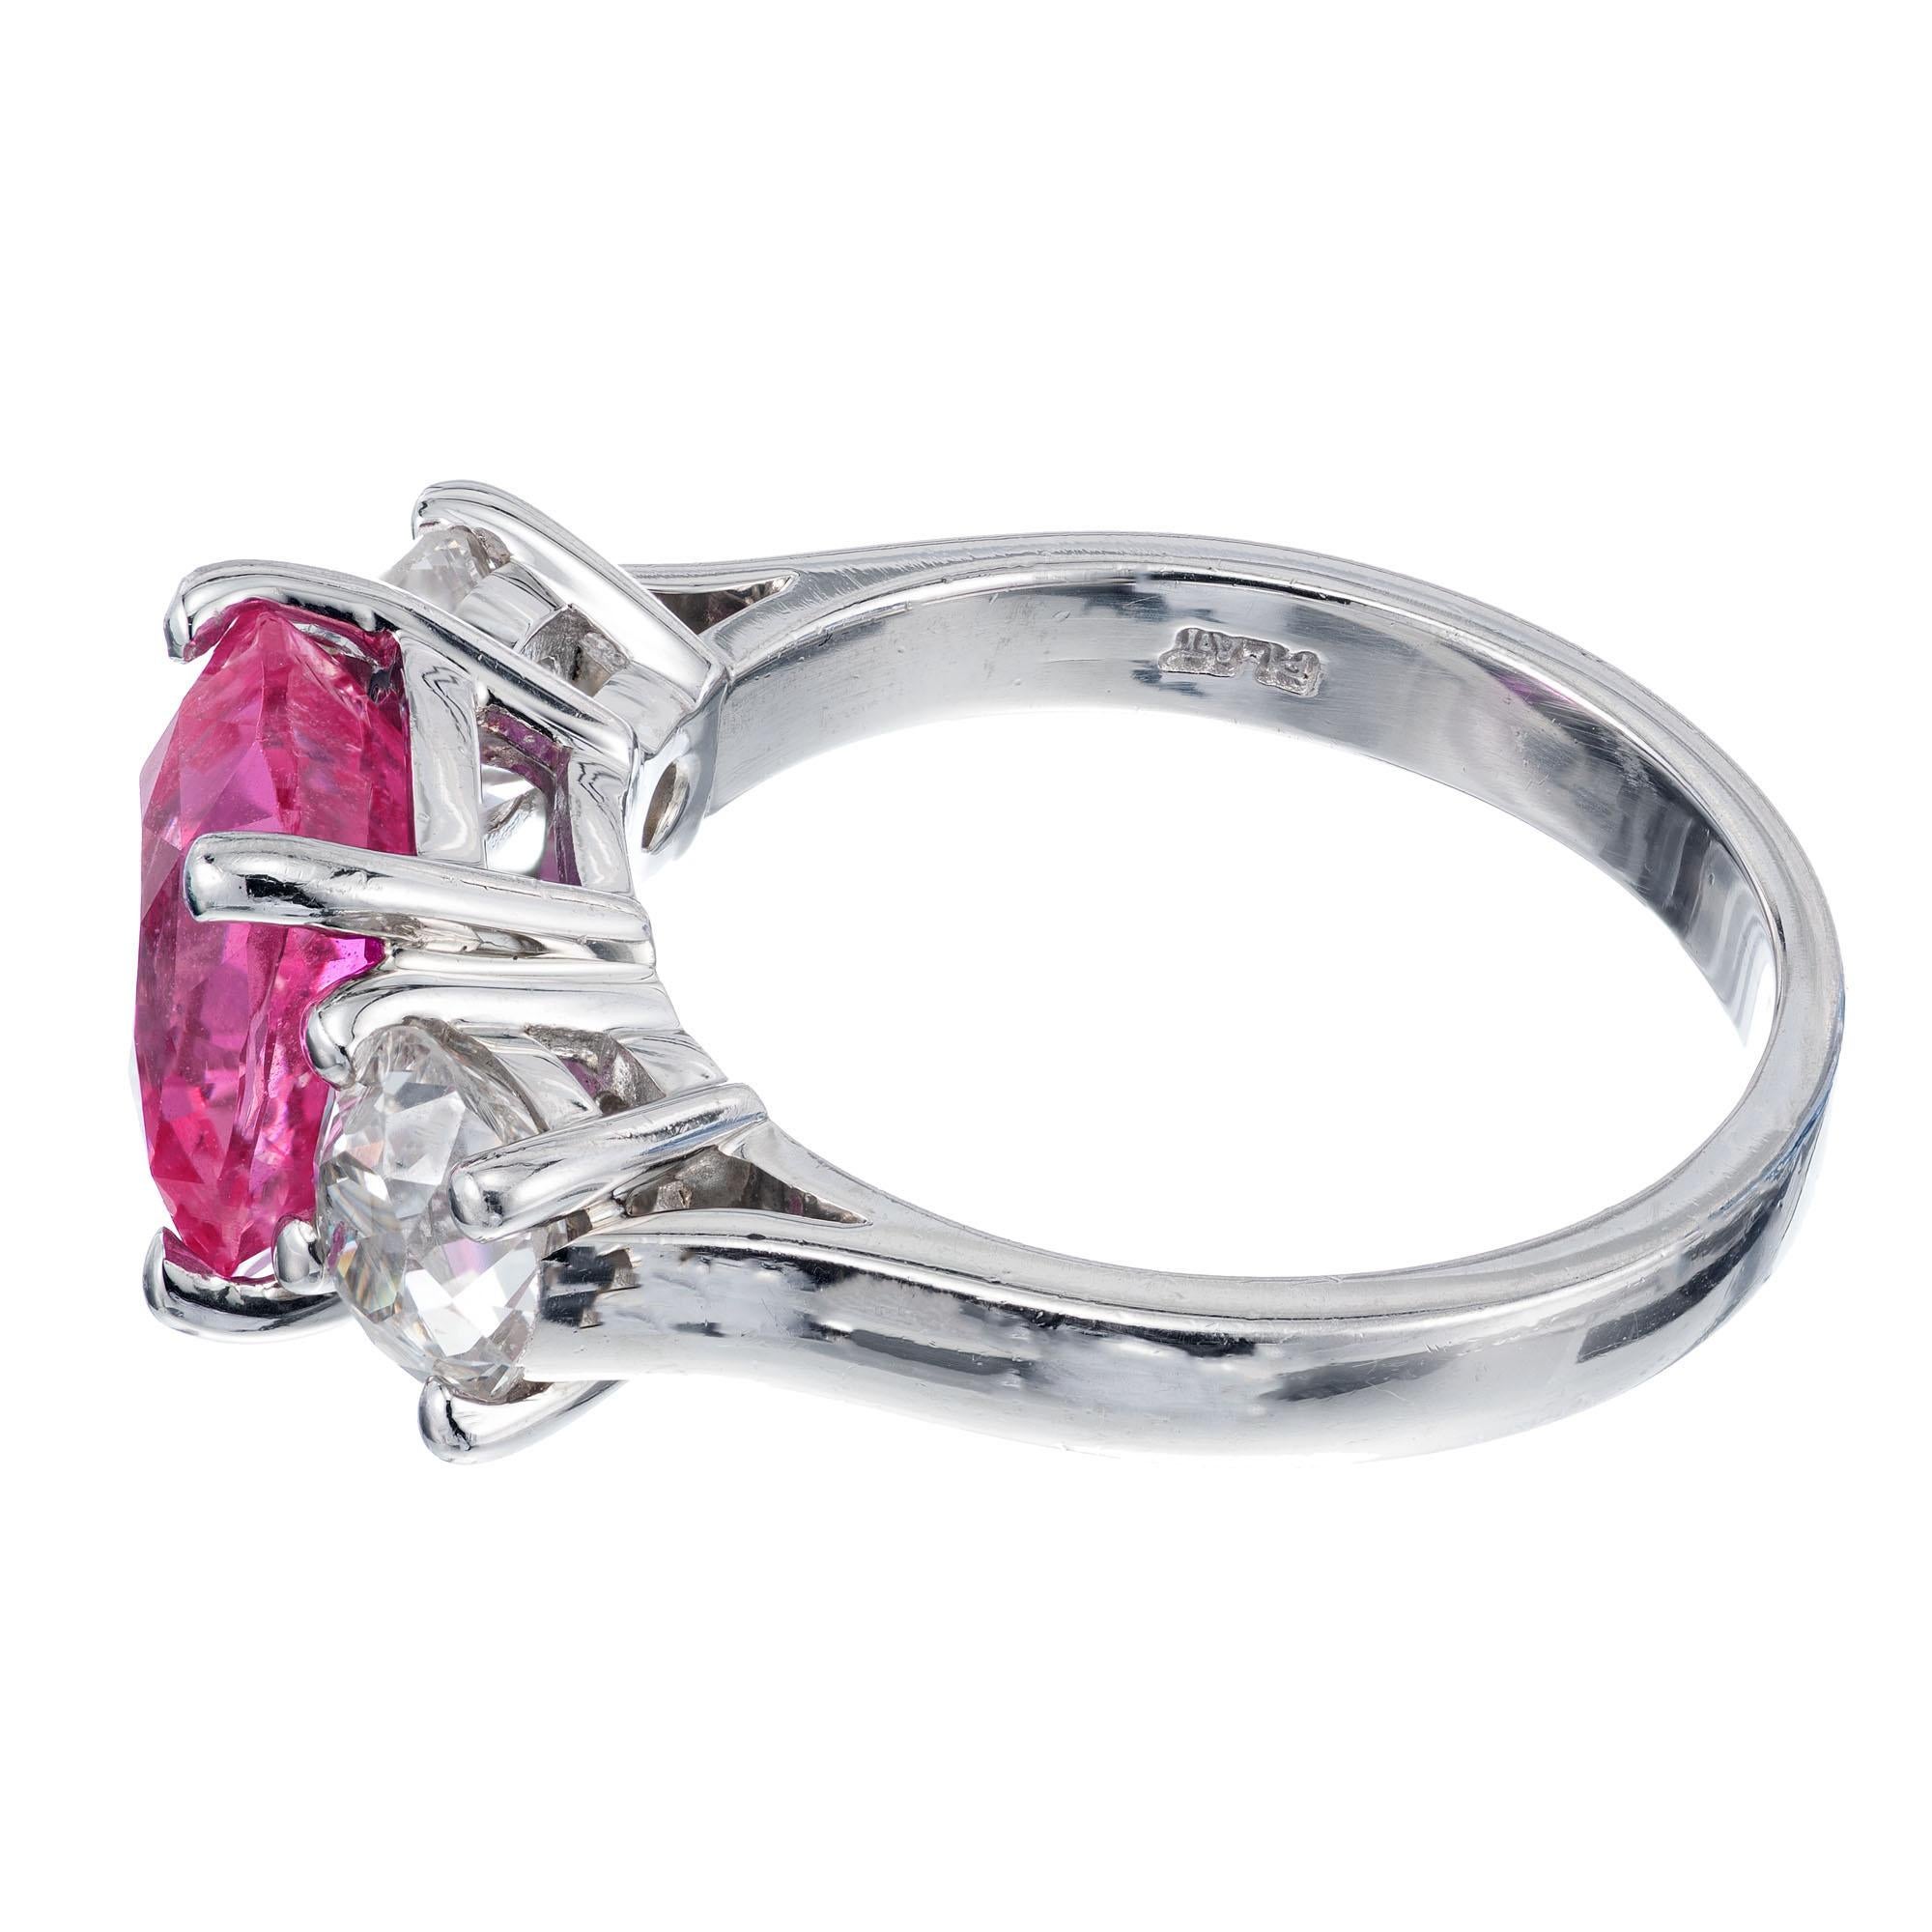 Cushion Cut Peter Suchy GIA 4.02 Carat Pink Sapphire Diamond Platinum Engagement Ring For Sale